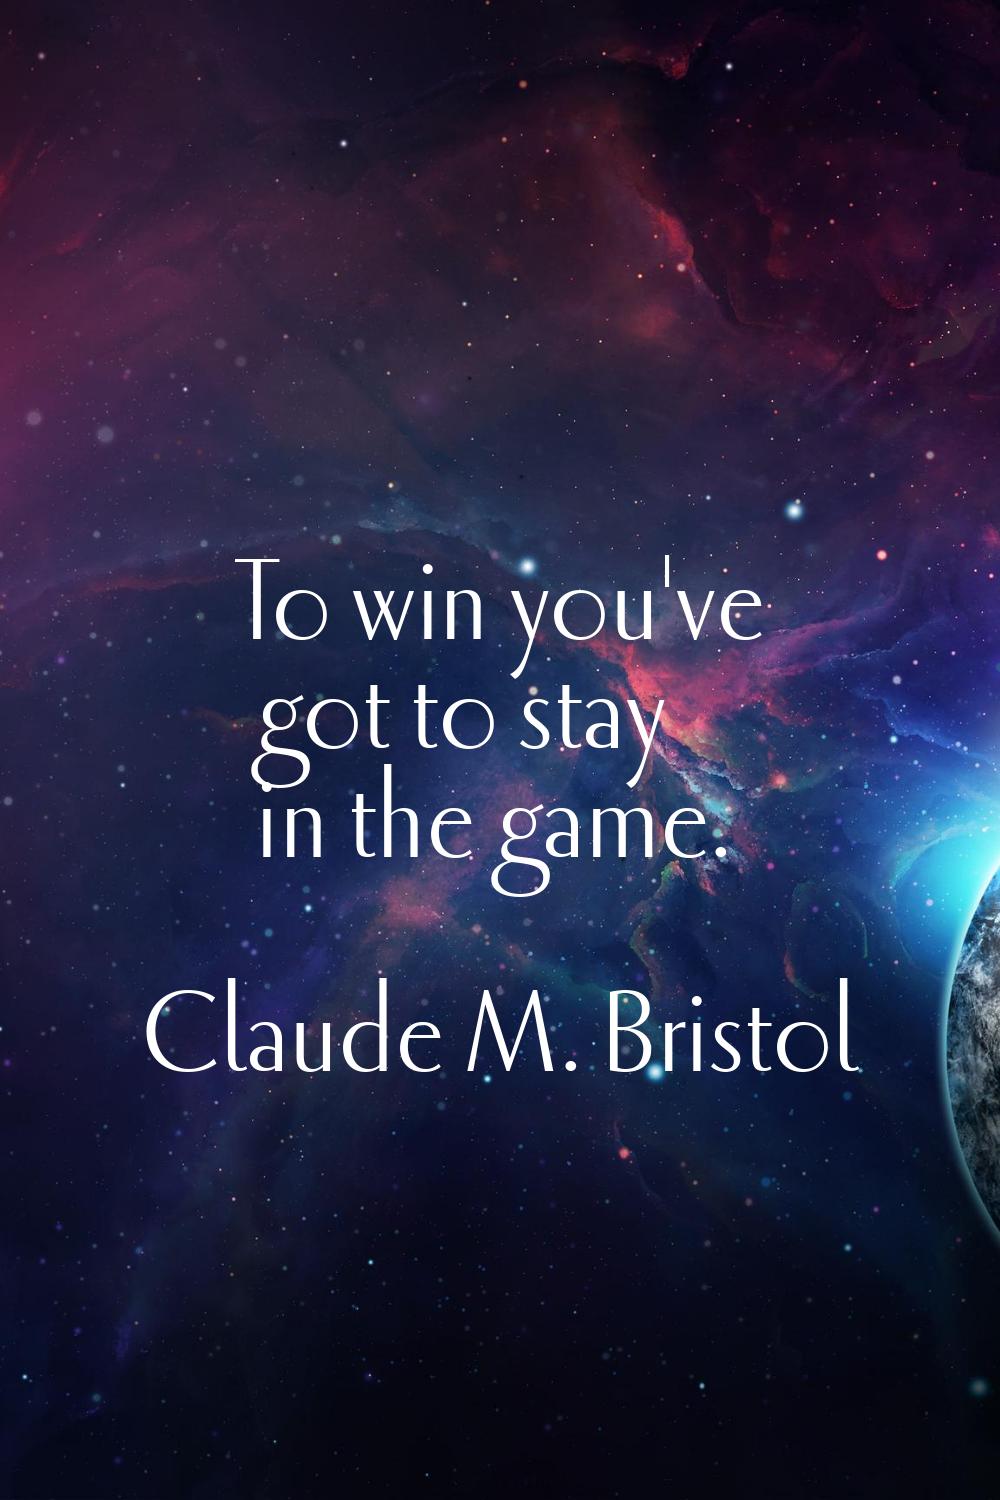 To win you've got to stay in the game.